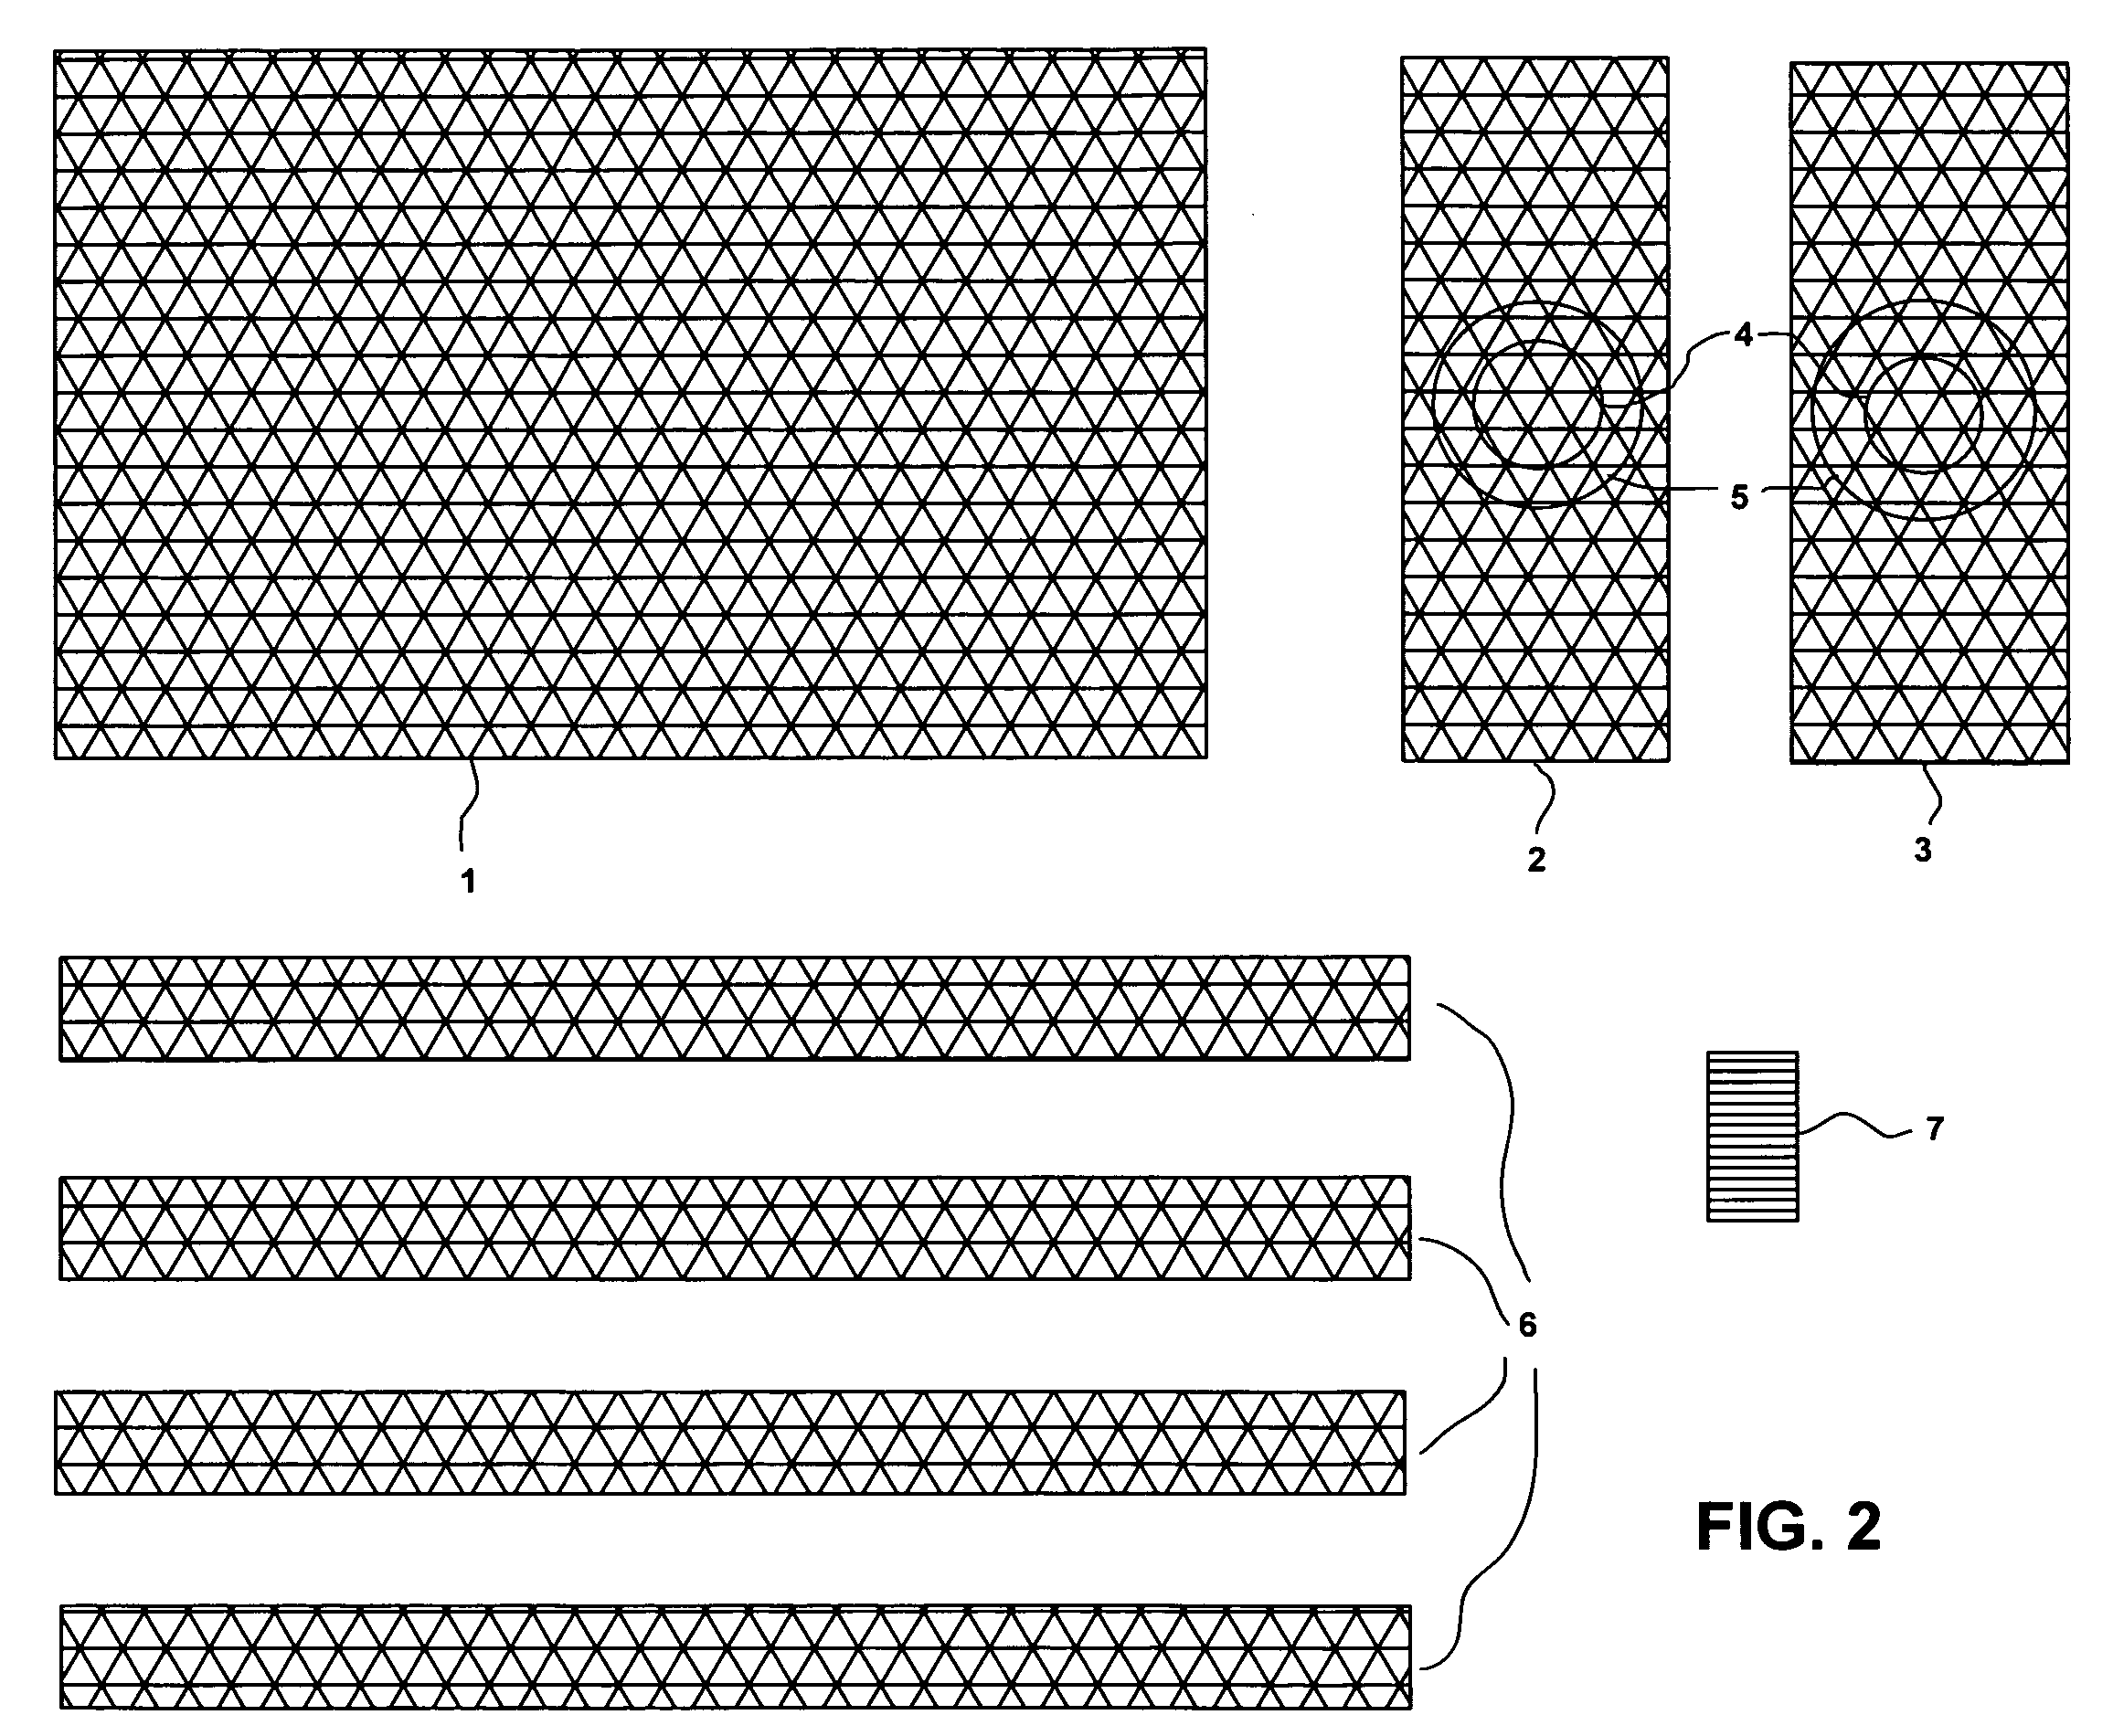 Method and apparatus for insulating hydroponic lamps